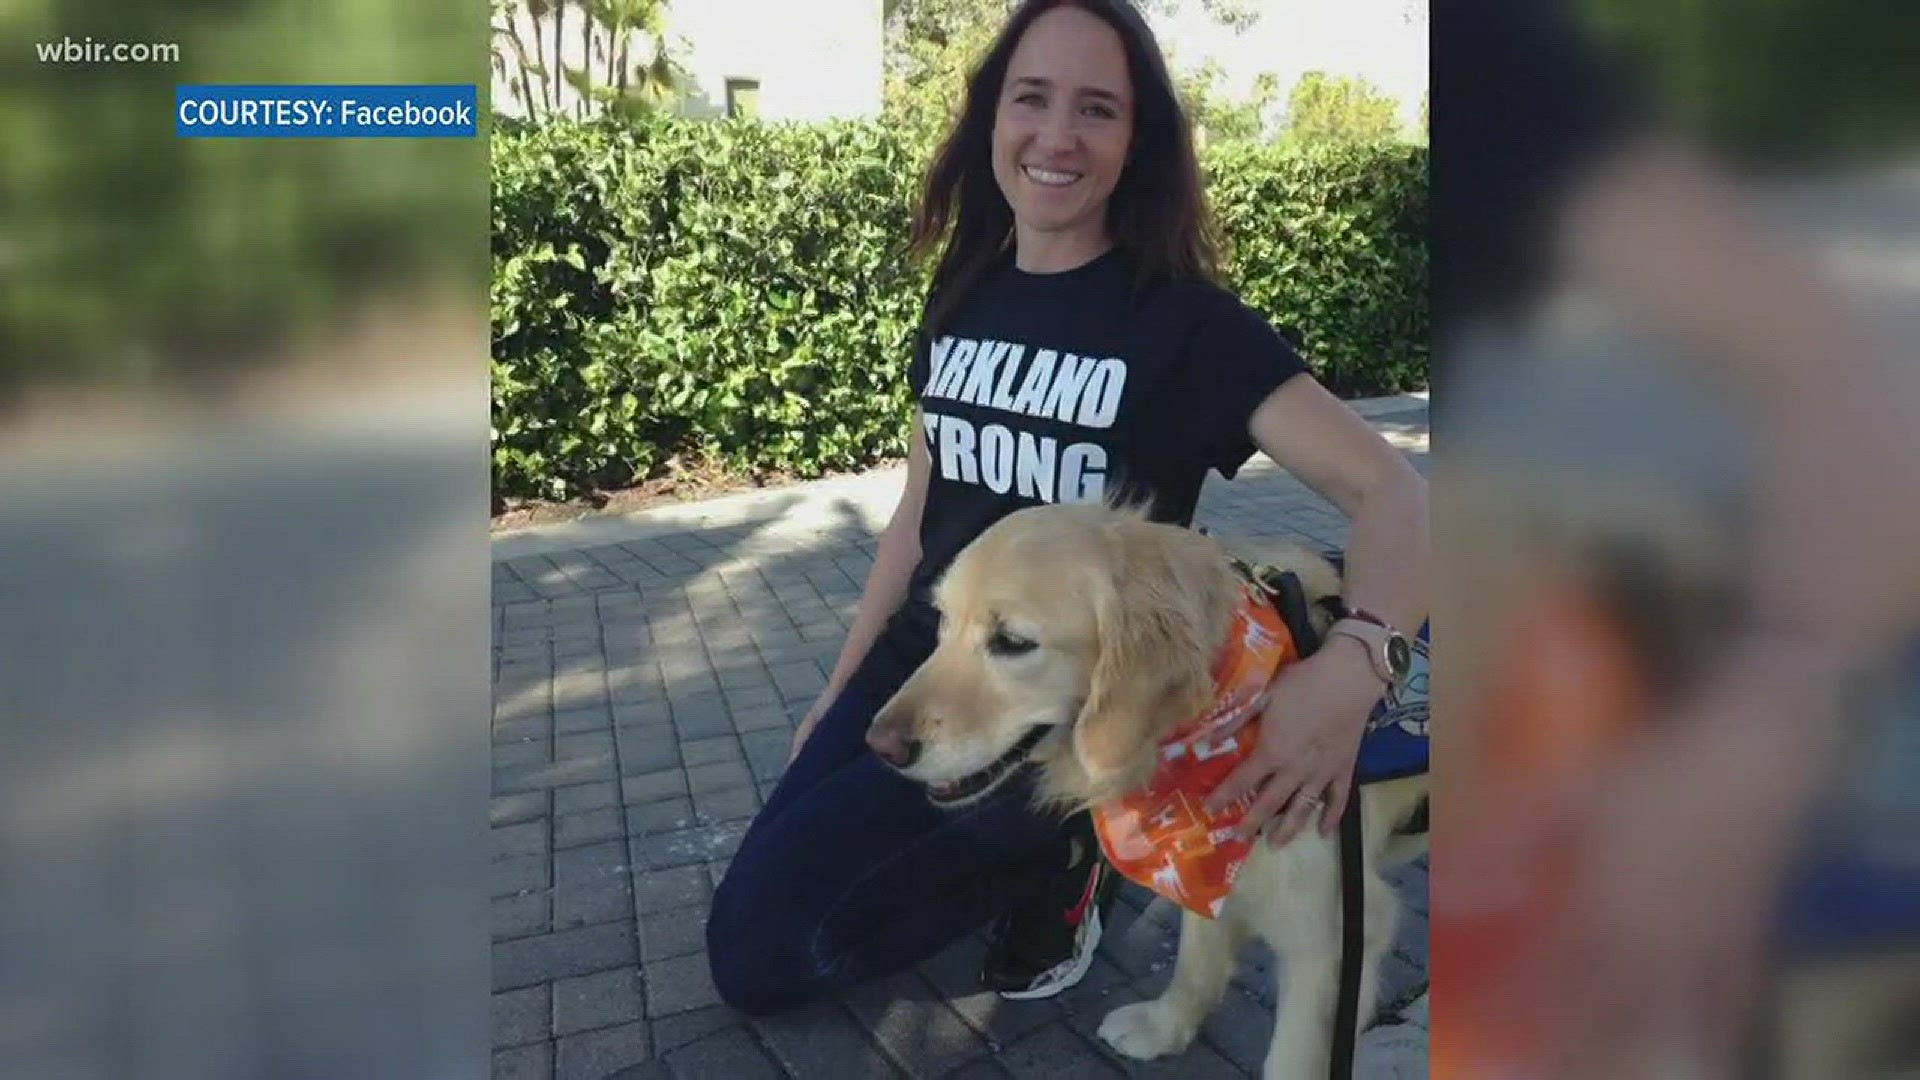 Jewel, the comfort dog from Loudon County, has been comforting people in Parkland, Florida as they grieve the loss of 17 lives.